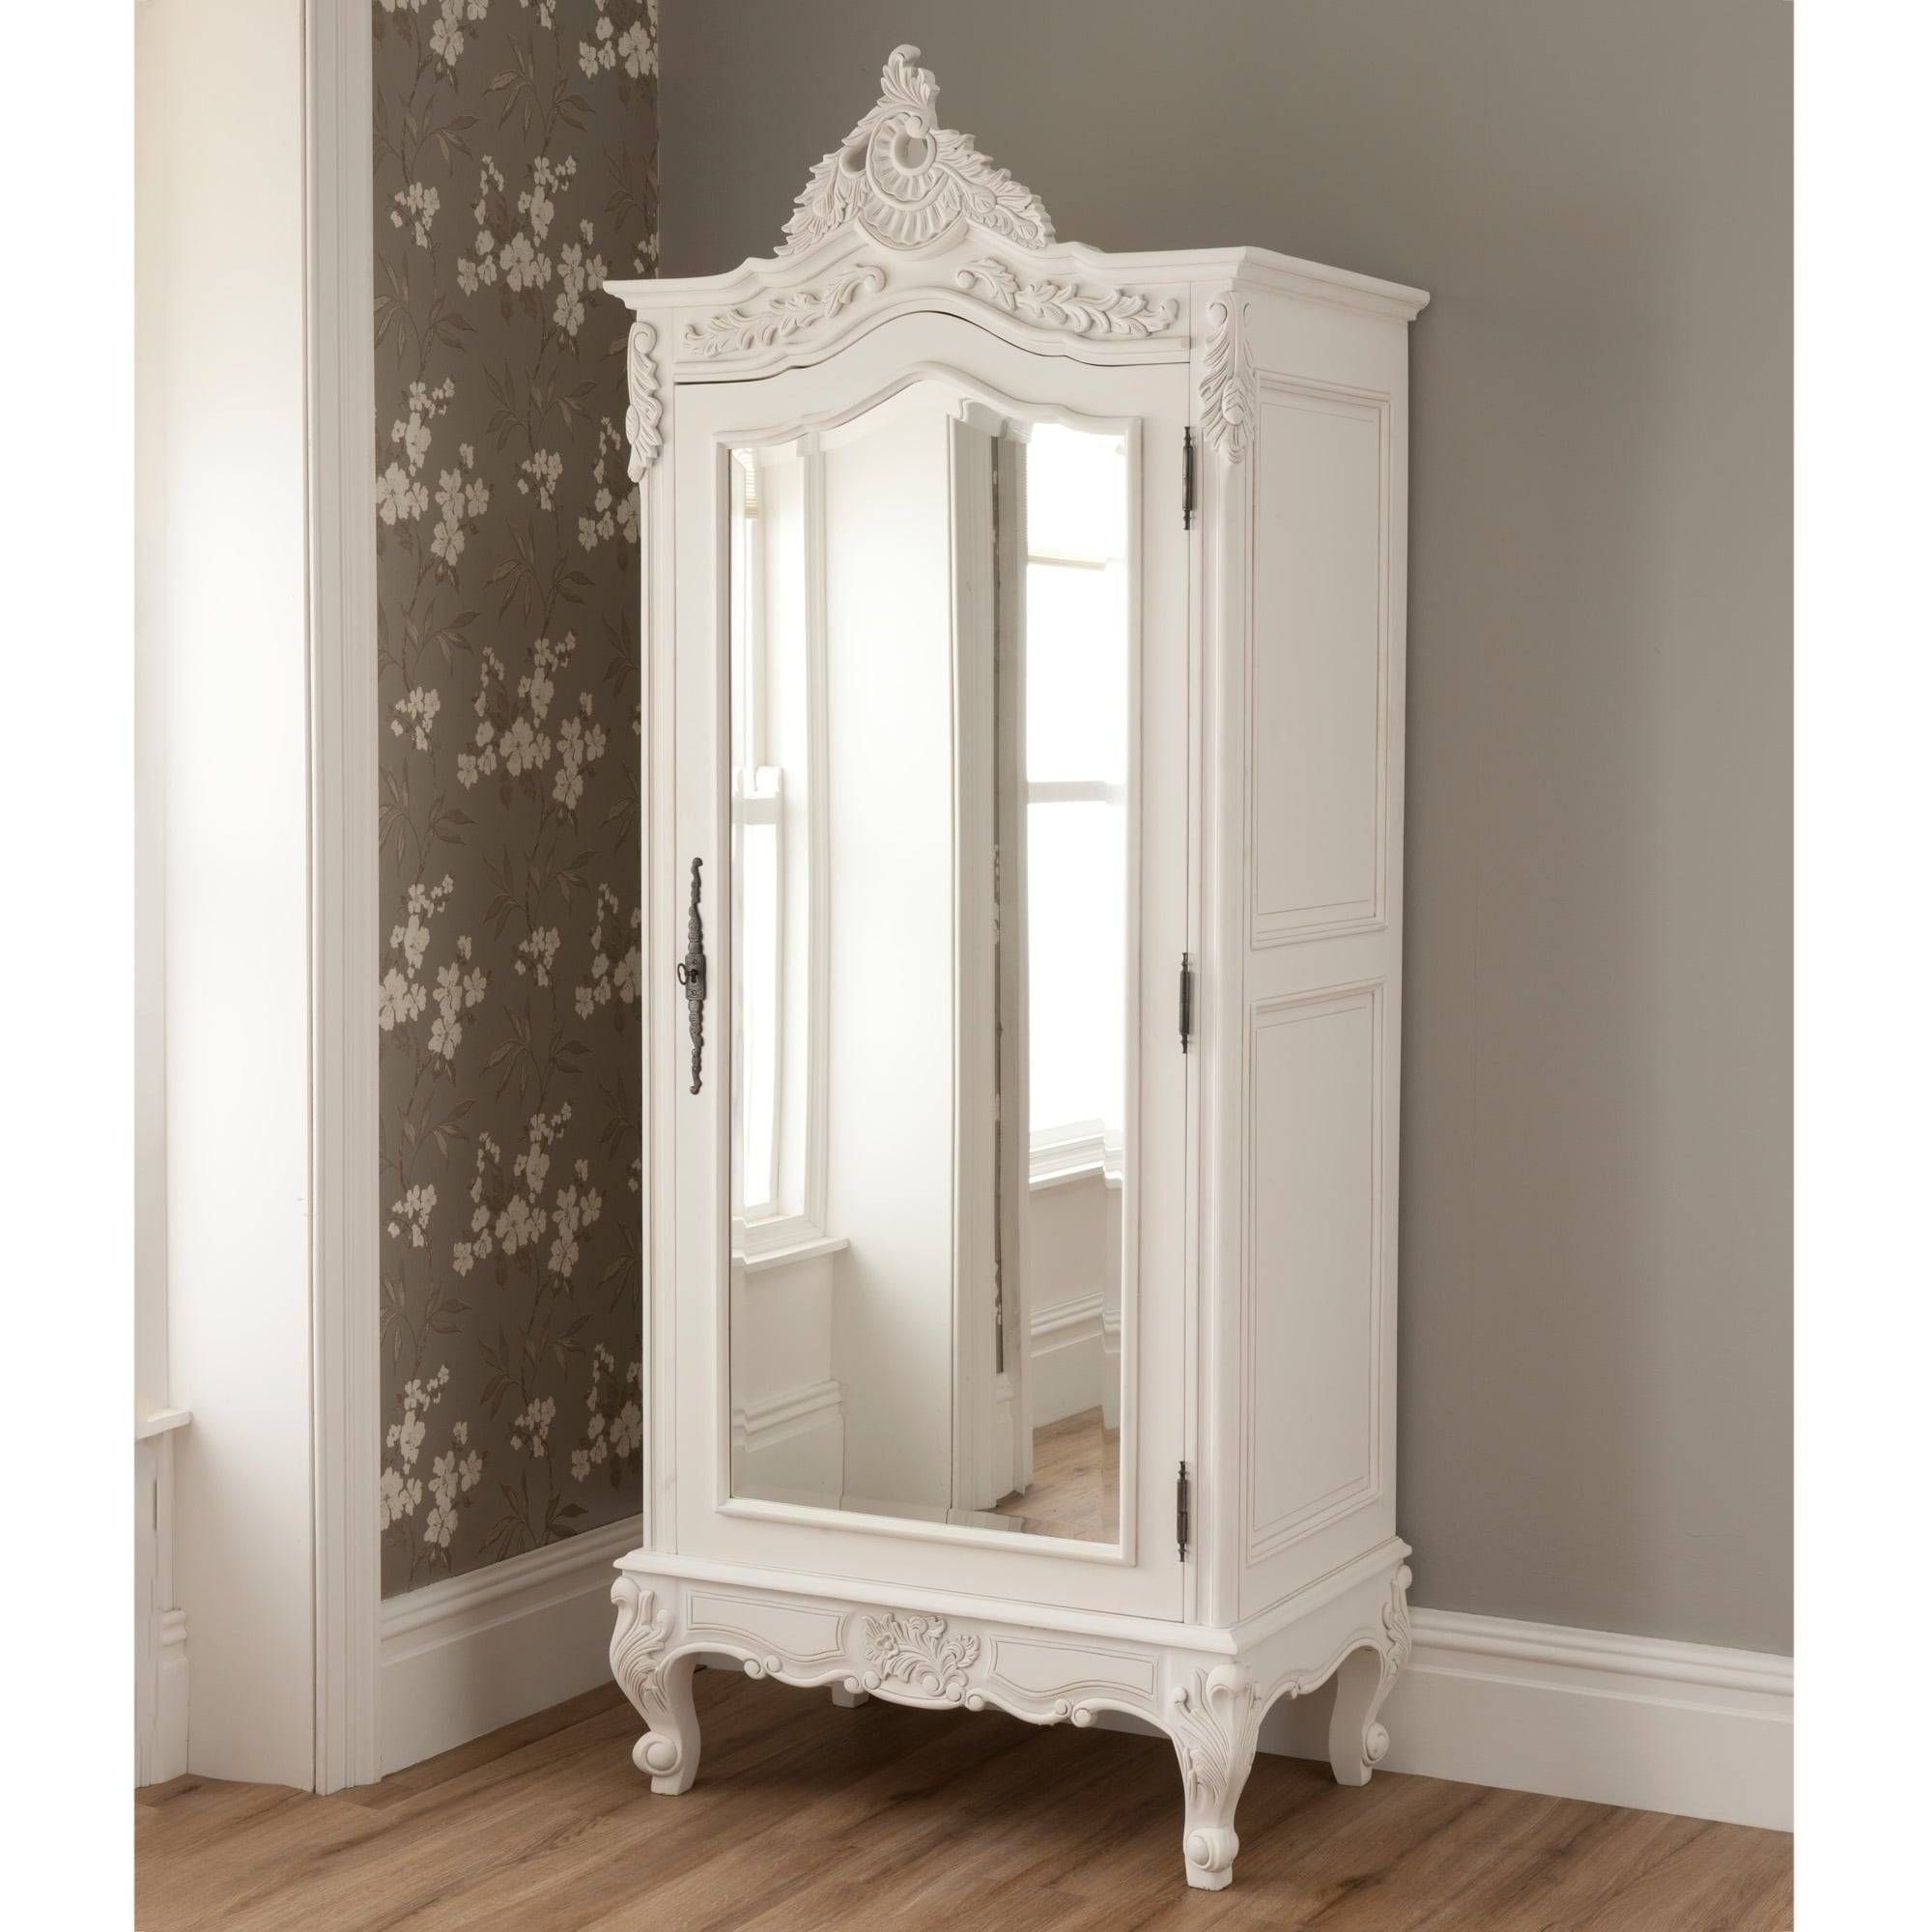 La Rochelle Mirrored Antique French 1 Door Wardrobe For Antique Wardrobes (View 9 of 15)